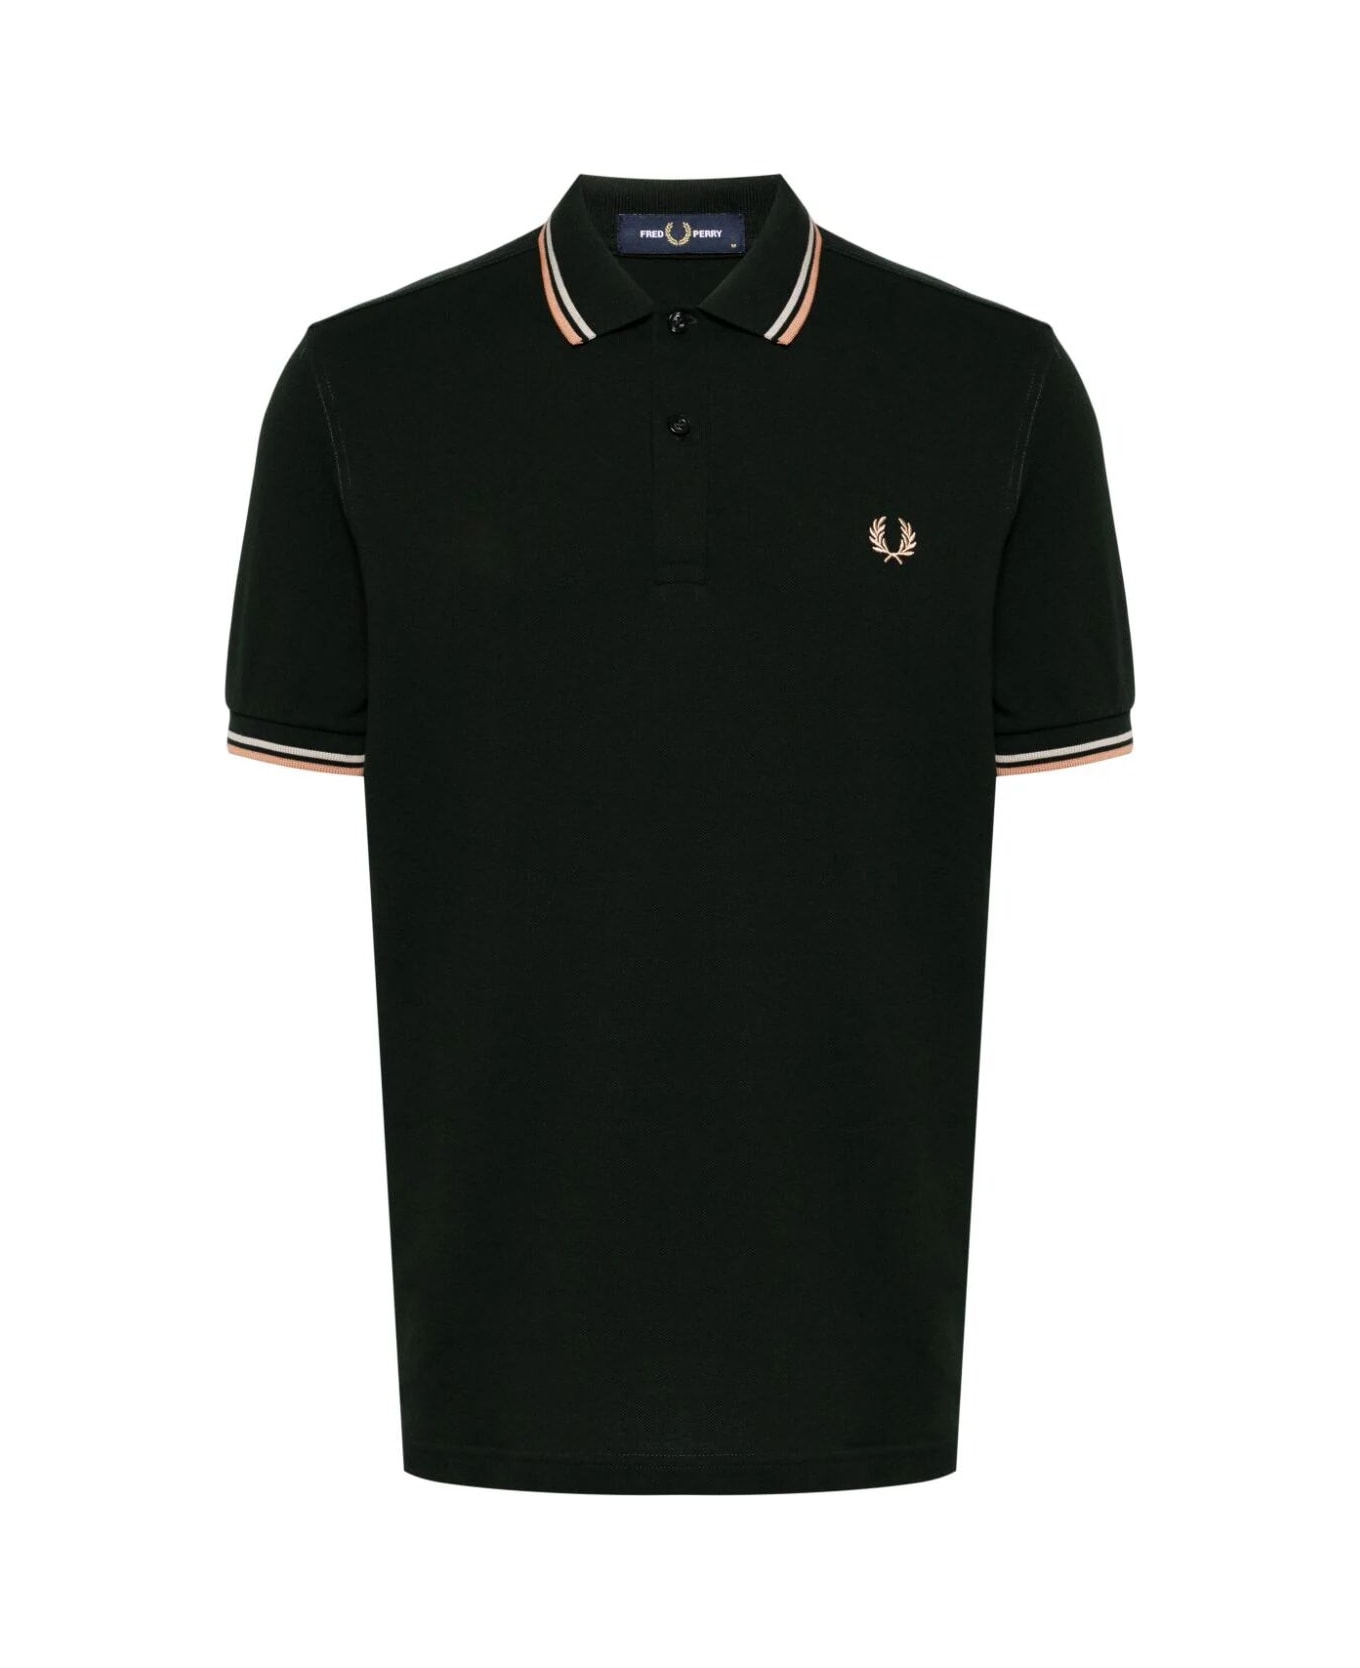 Fred Perry Fp Twin Tipped Shirt - Ngre Wrgrey Lrus